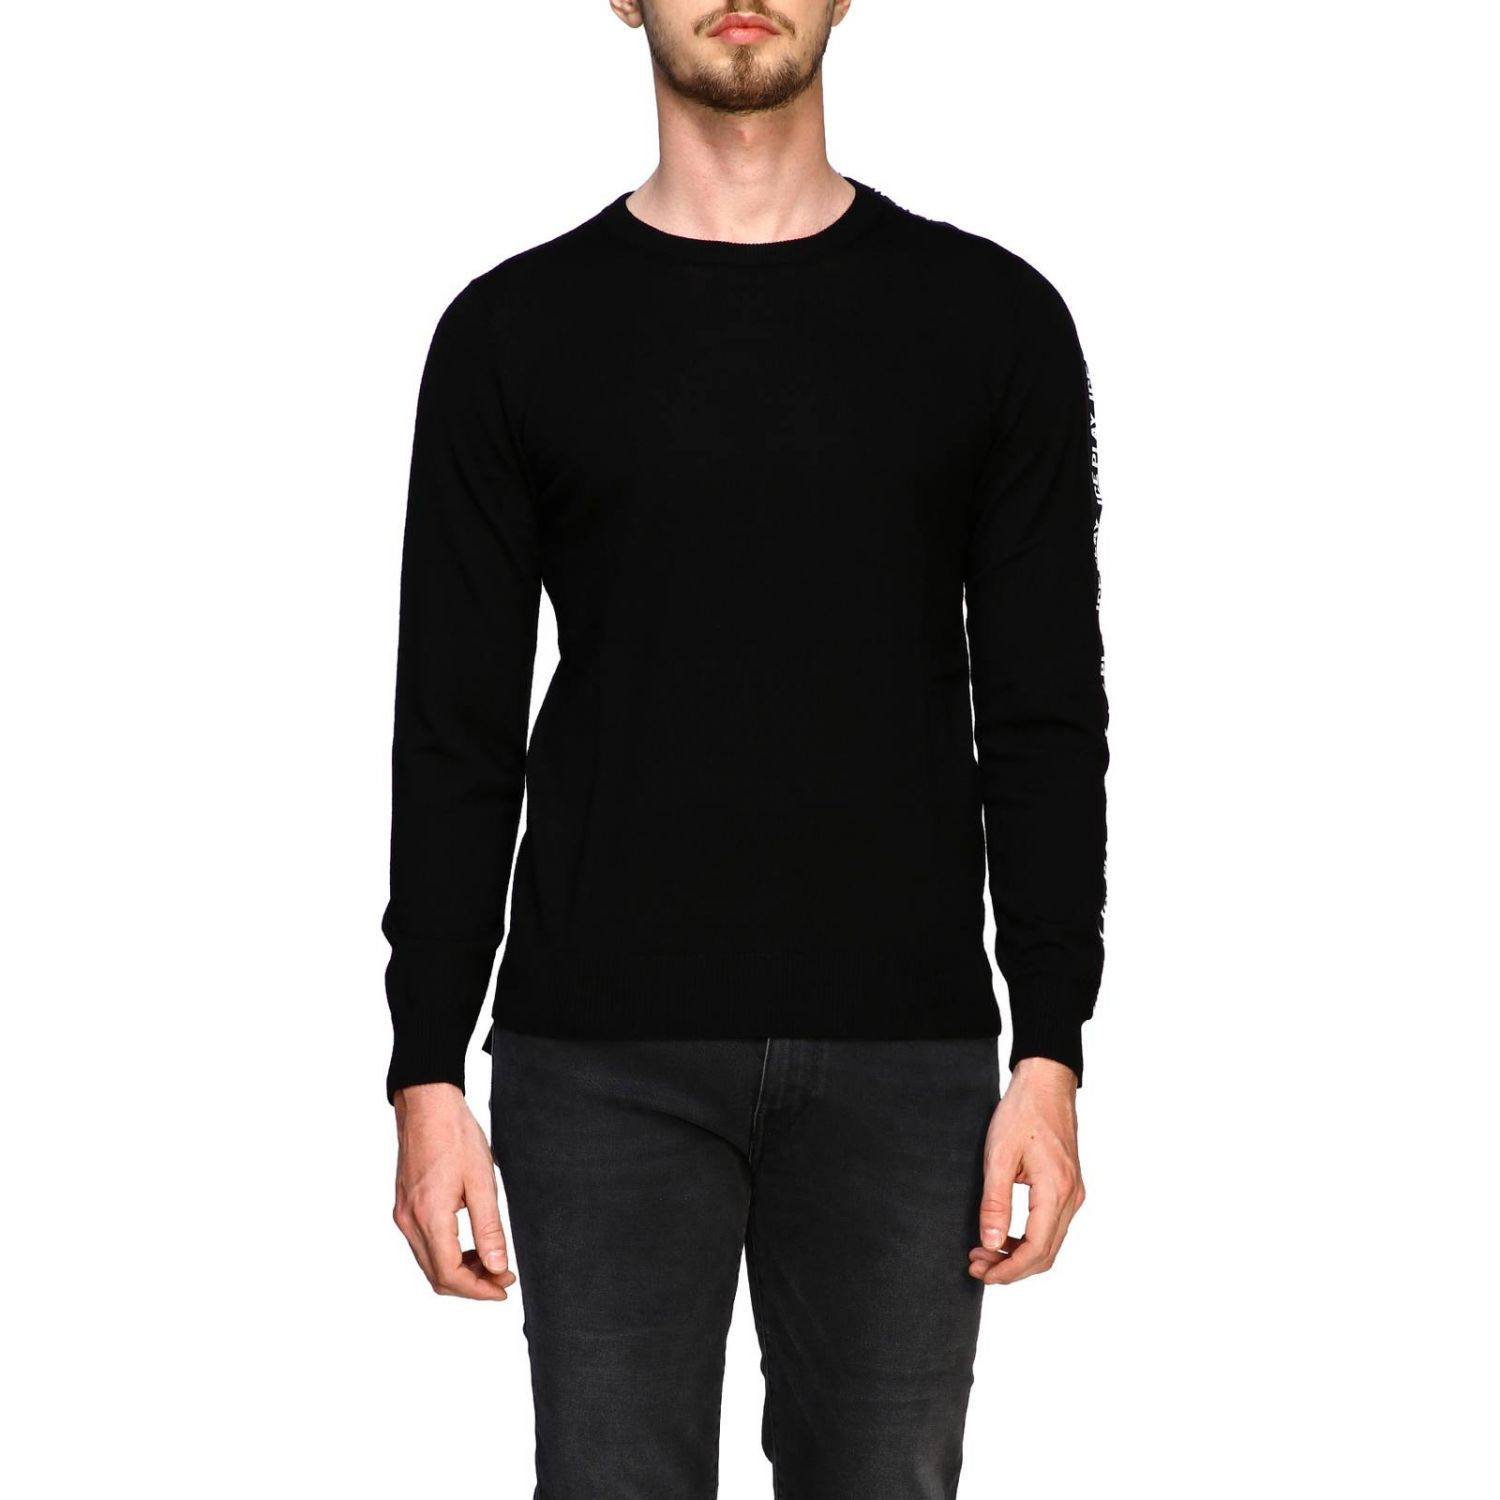 Ice Play Outlet: sweater for man - Black | Ice Play sweater A010 9001 ...